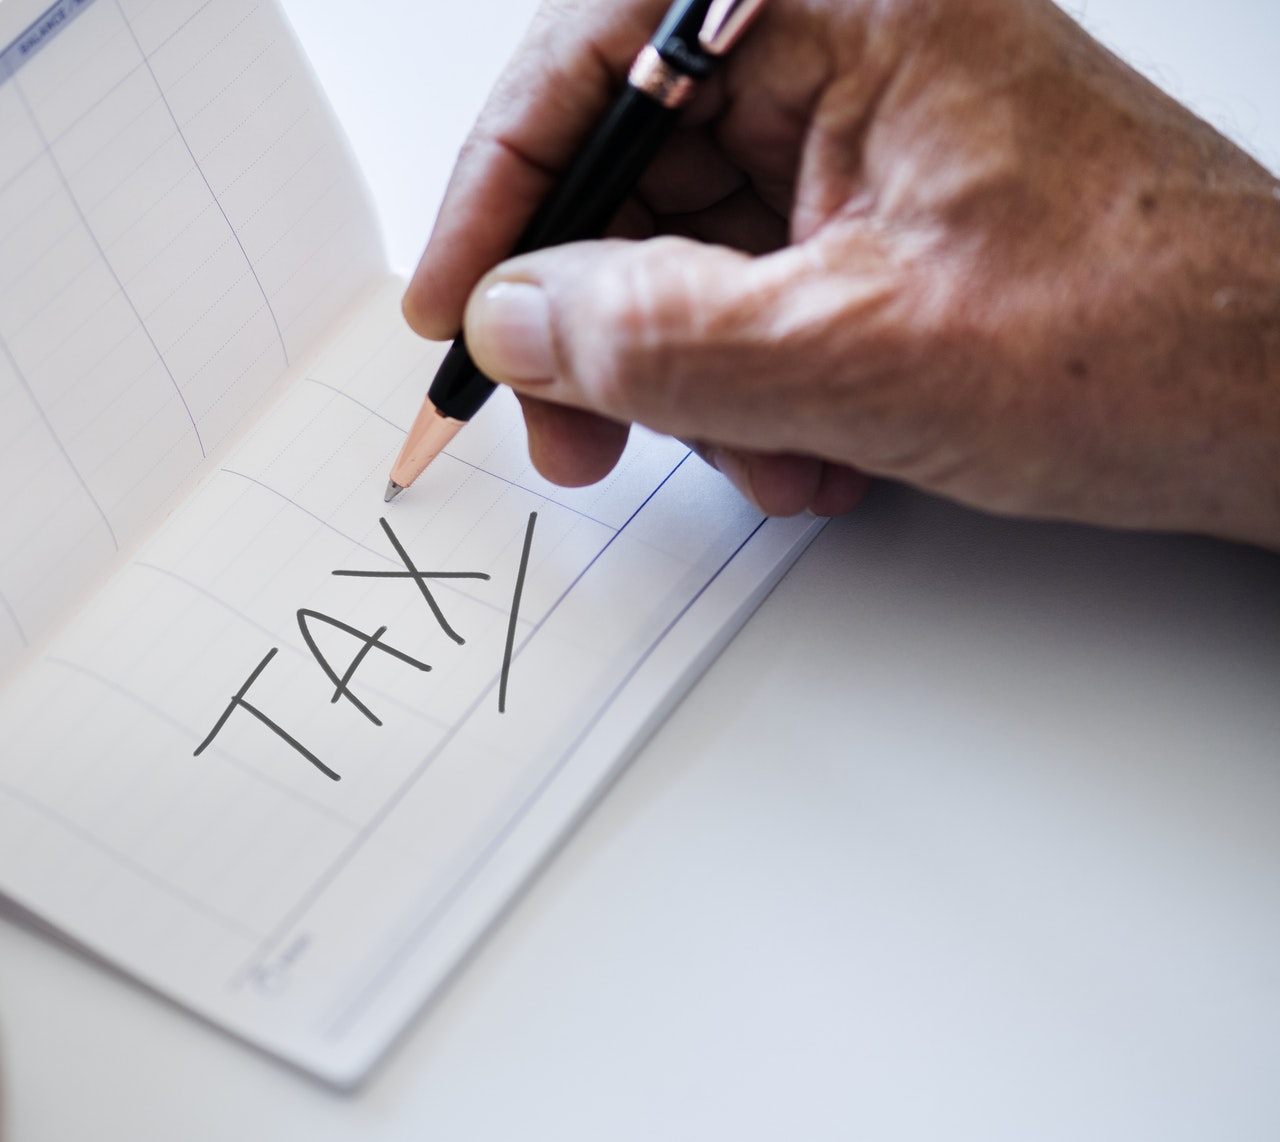 With the new tax year, what are the key changes that may affect you?